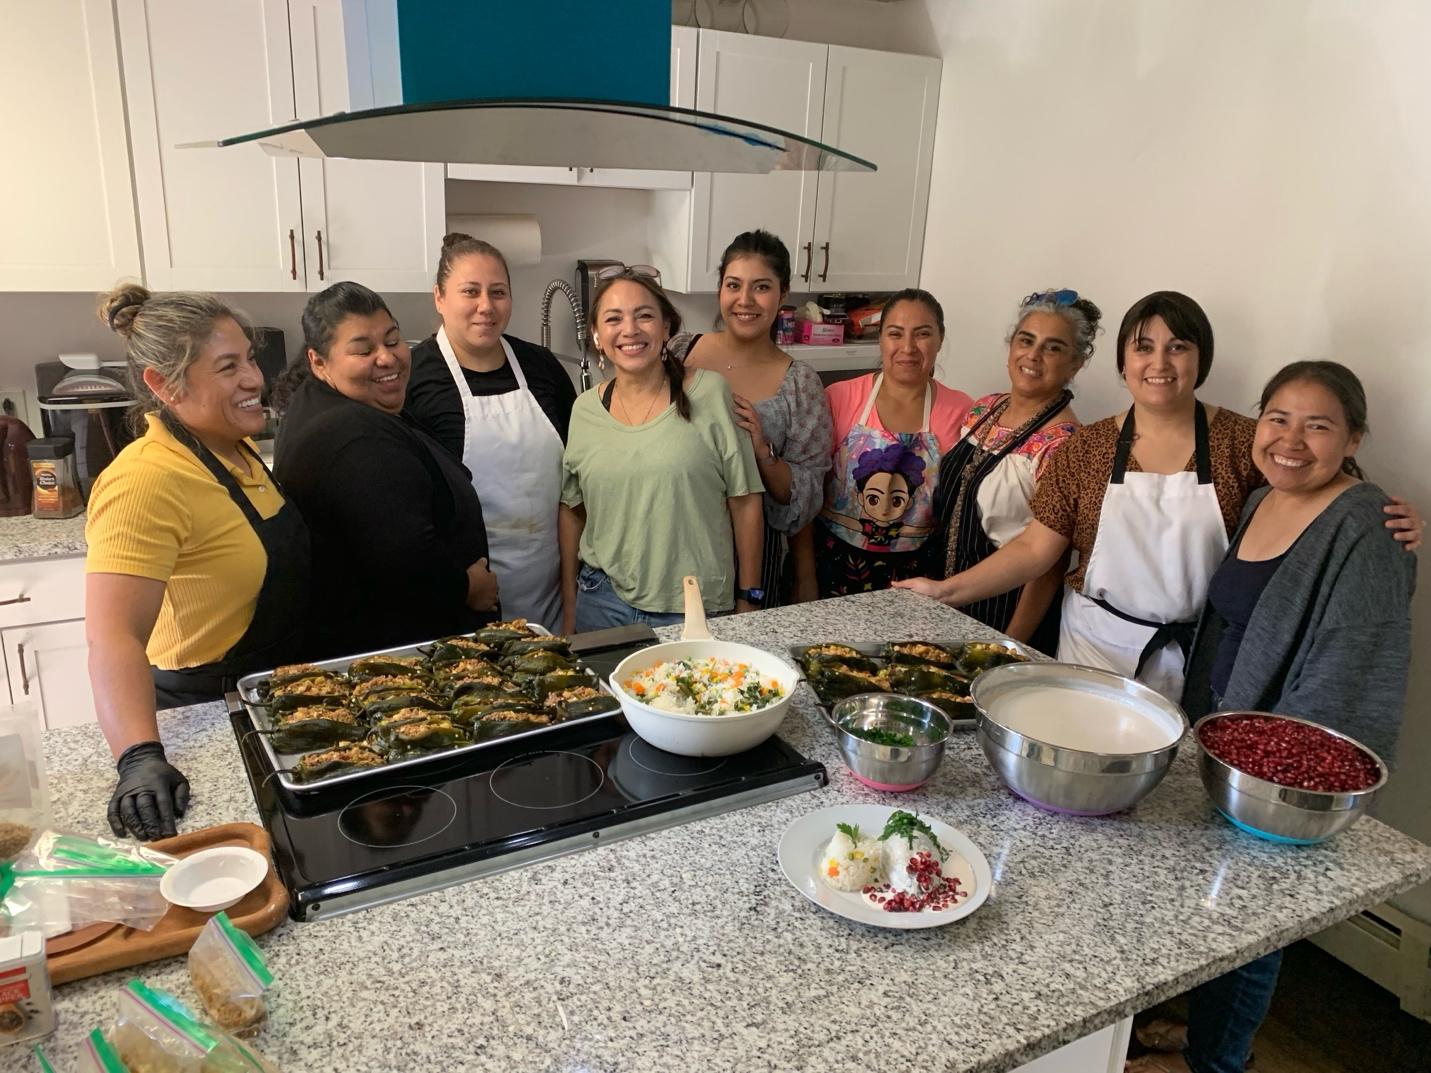 A group of women in a kitchen

Description automatically generated